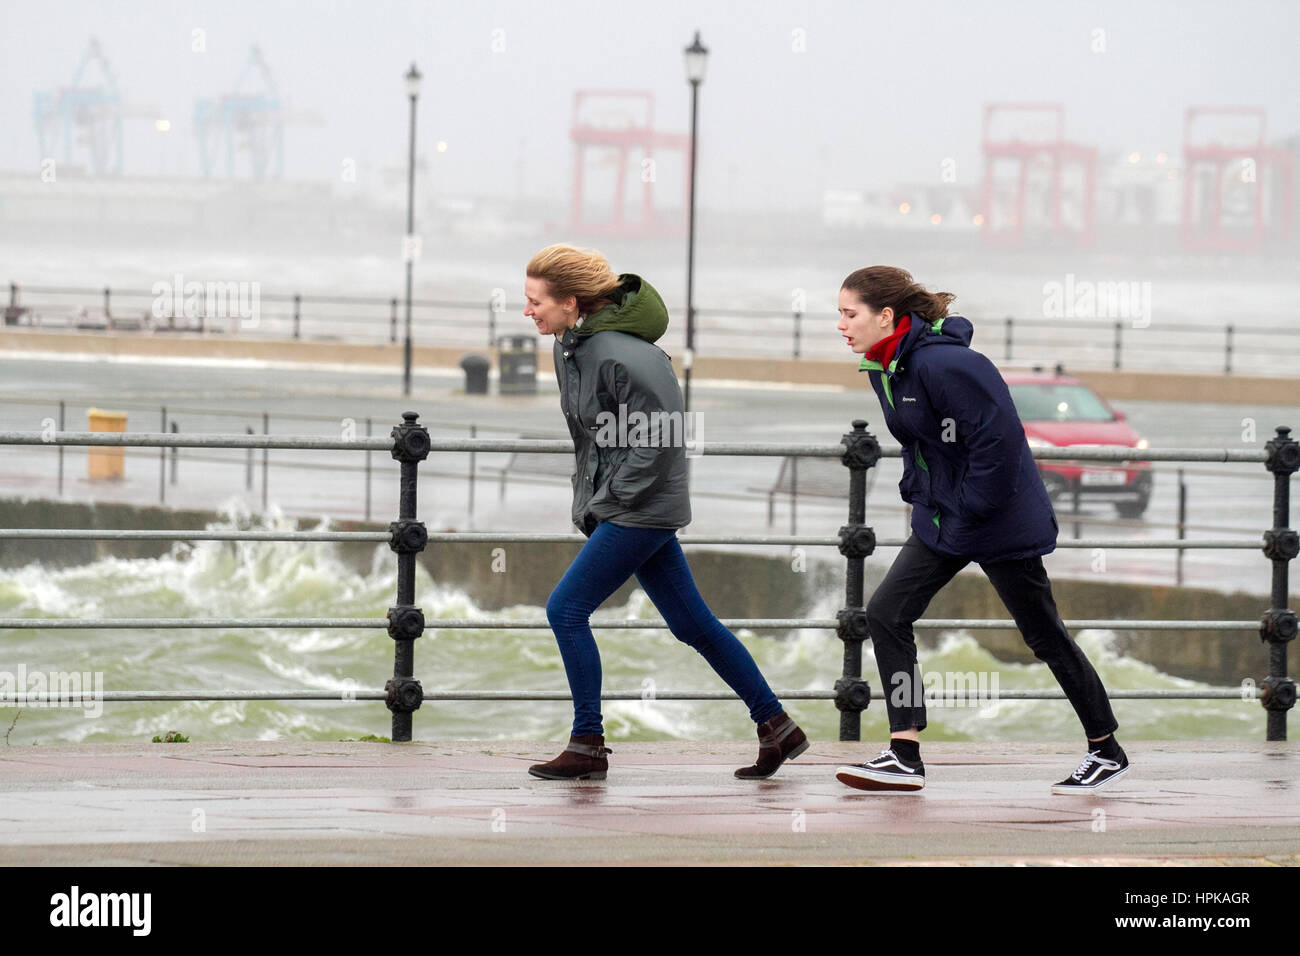 Storm Doris, New Brighton, Cheshire, UK. 23rd Feb, 2017. UK Weather. Storm Doris destroys the Wirral peninsula as she made land this morning.  Winds up to 80mph caused the closure of the Port of Liverpool, cancellations of all ferries & some major roads were closed.  A high tide of over 26' battered the New Brighton Lighthouse on the Wirral peninsula as Doris leaves a trail of destruction along the north west coastline.  Credit: Cernan Elias/Alamy Live News Stock Photo